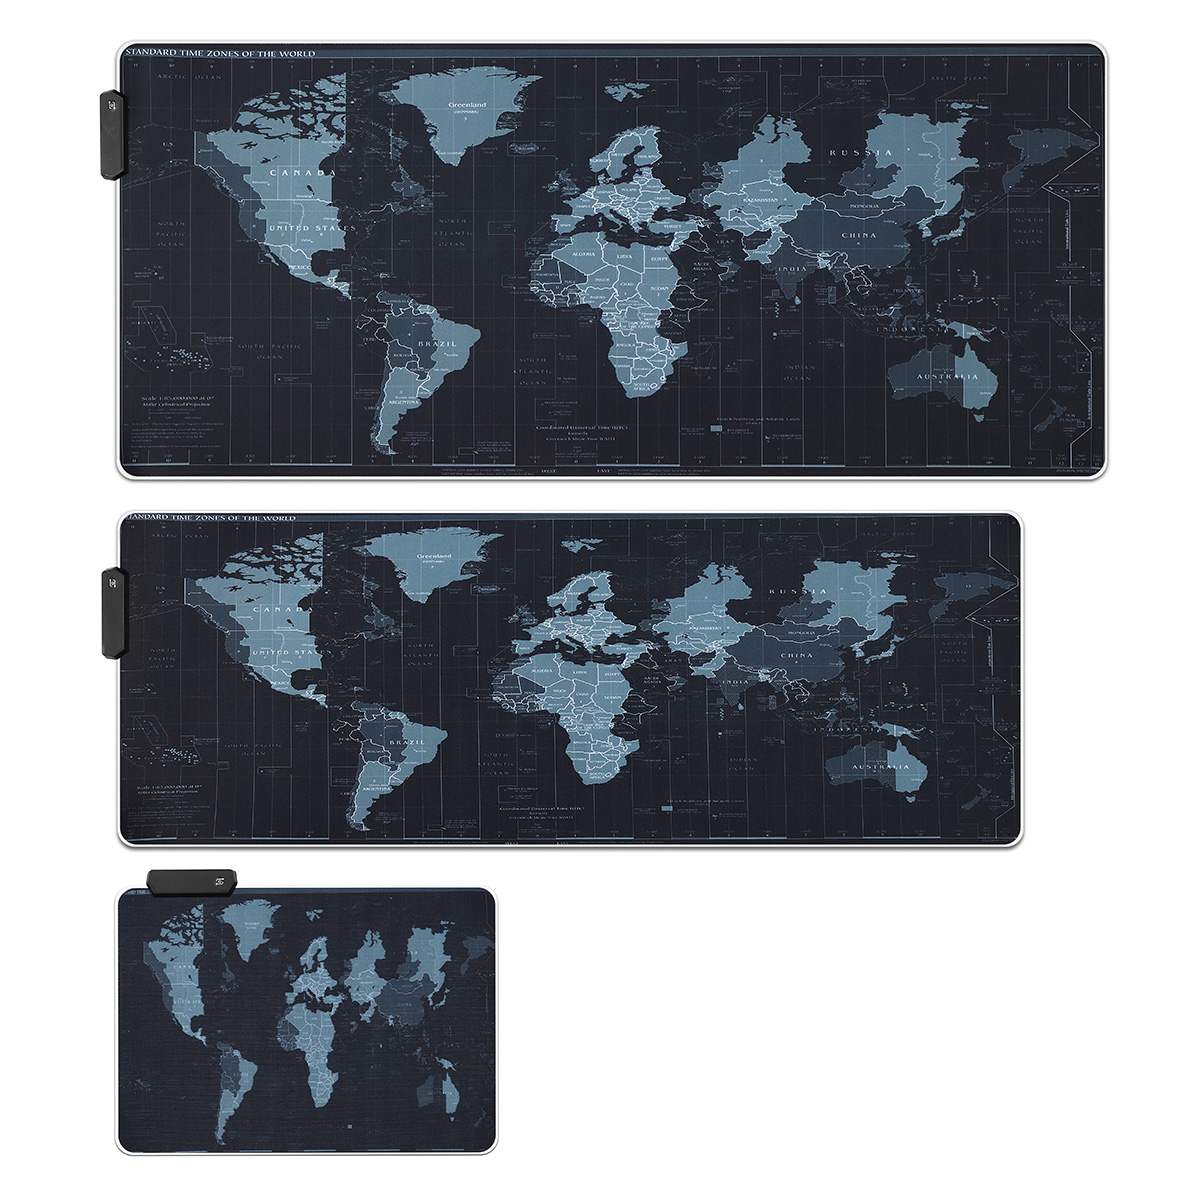 

350x250x4mm/350x300x4mm/600x350x4mm/800x300x4mm900x400x4mm Large Non-Slip World Map Game Mouse Pad for PC Laptop Compute